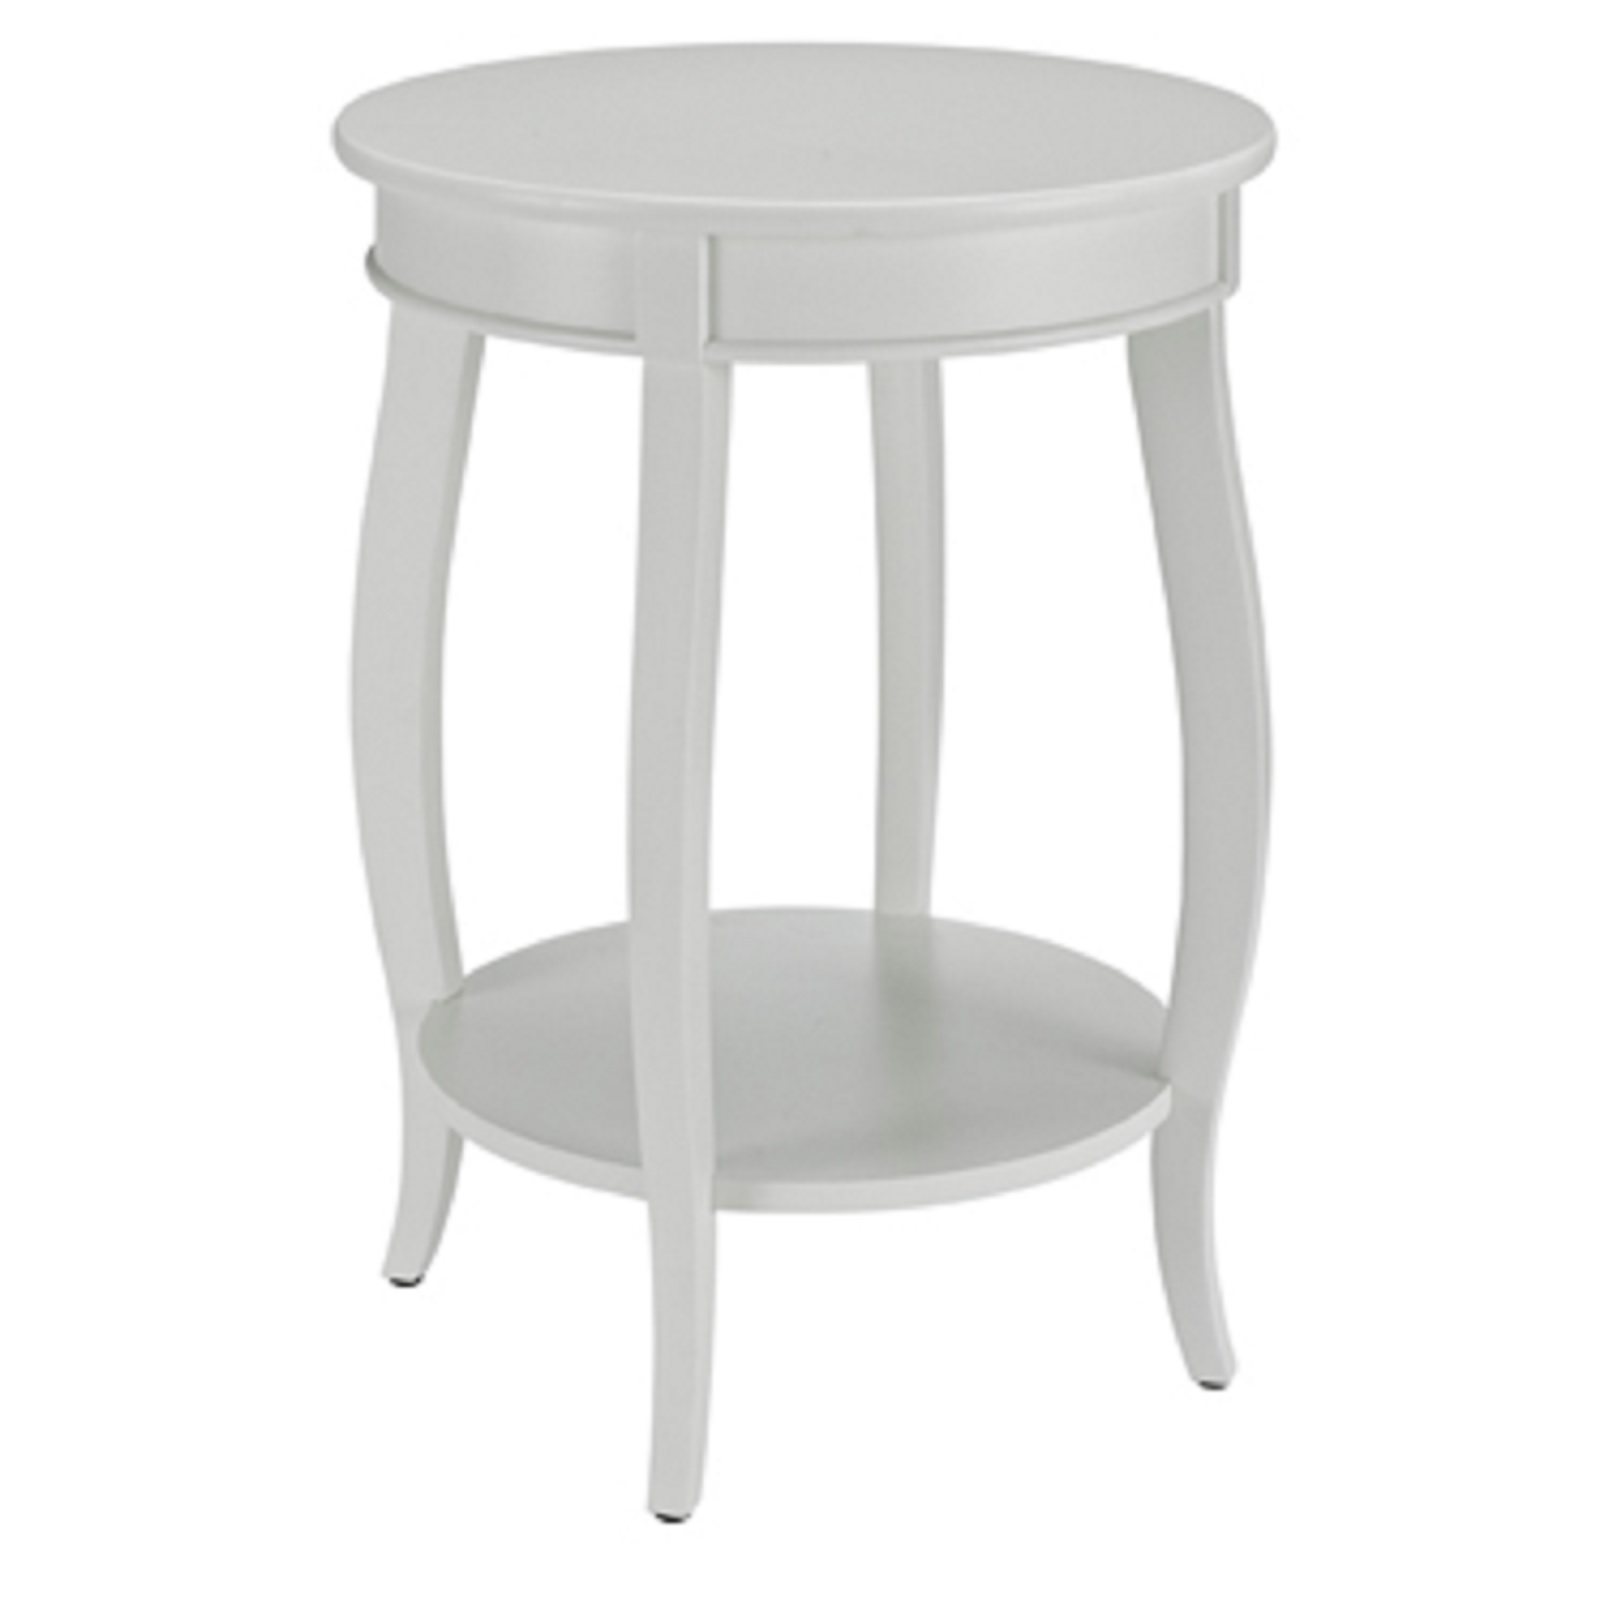 L Powell White Round Table with Shelf